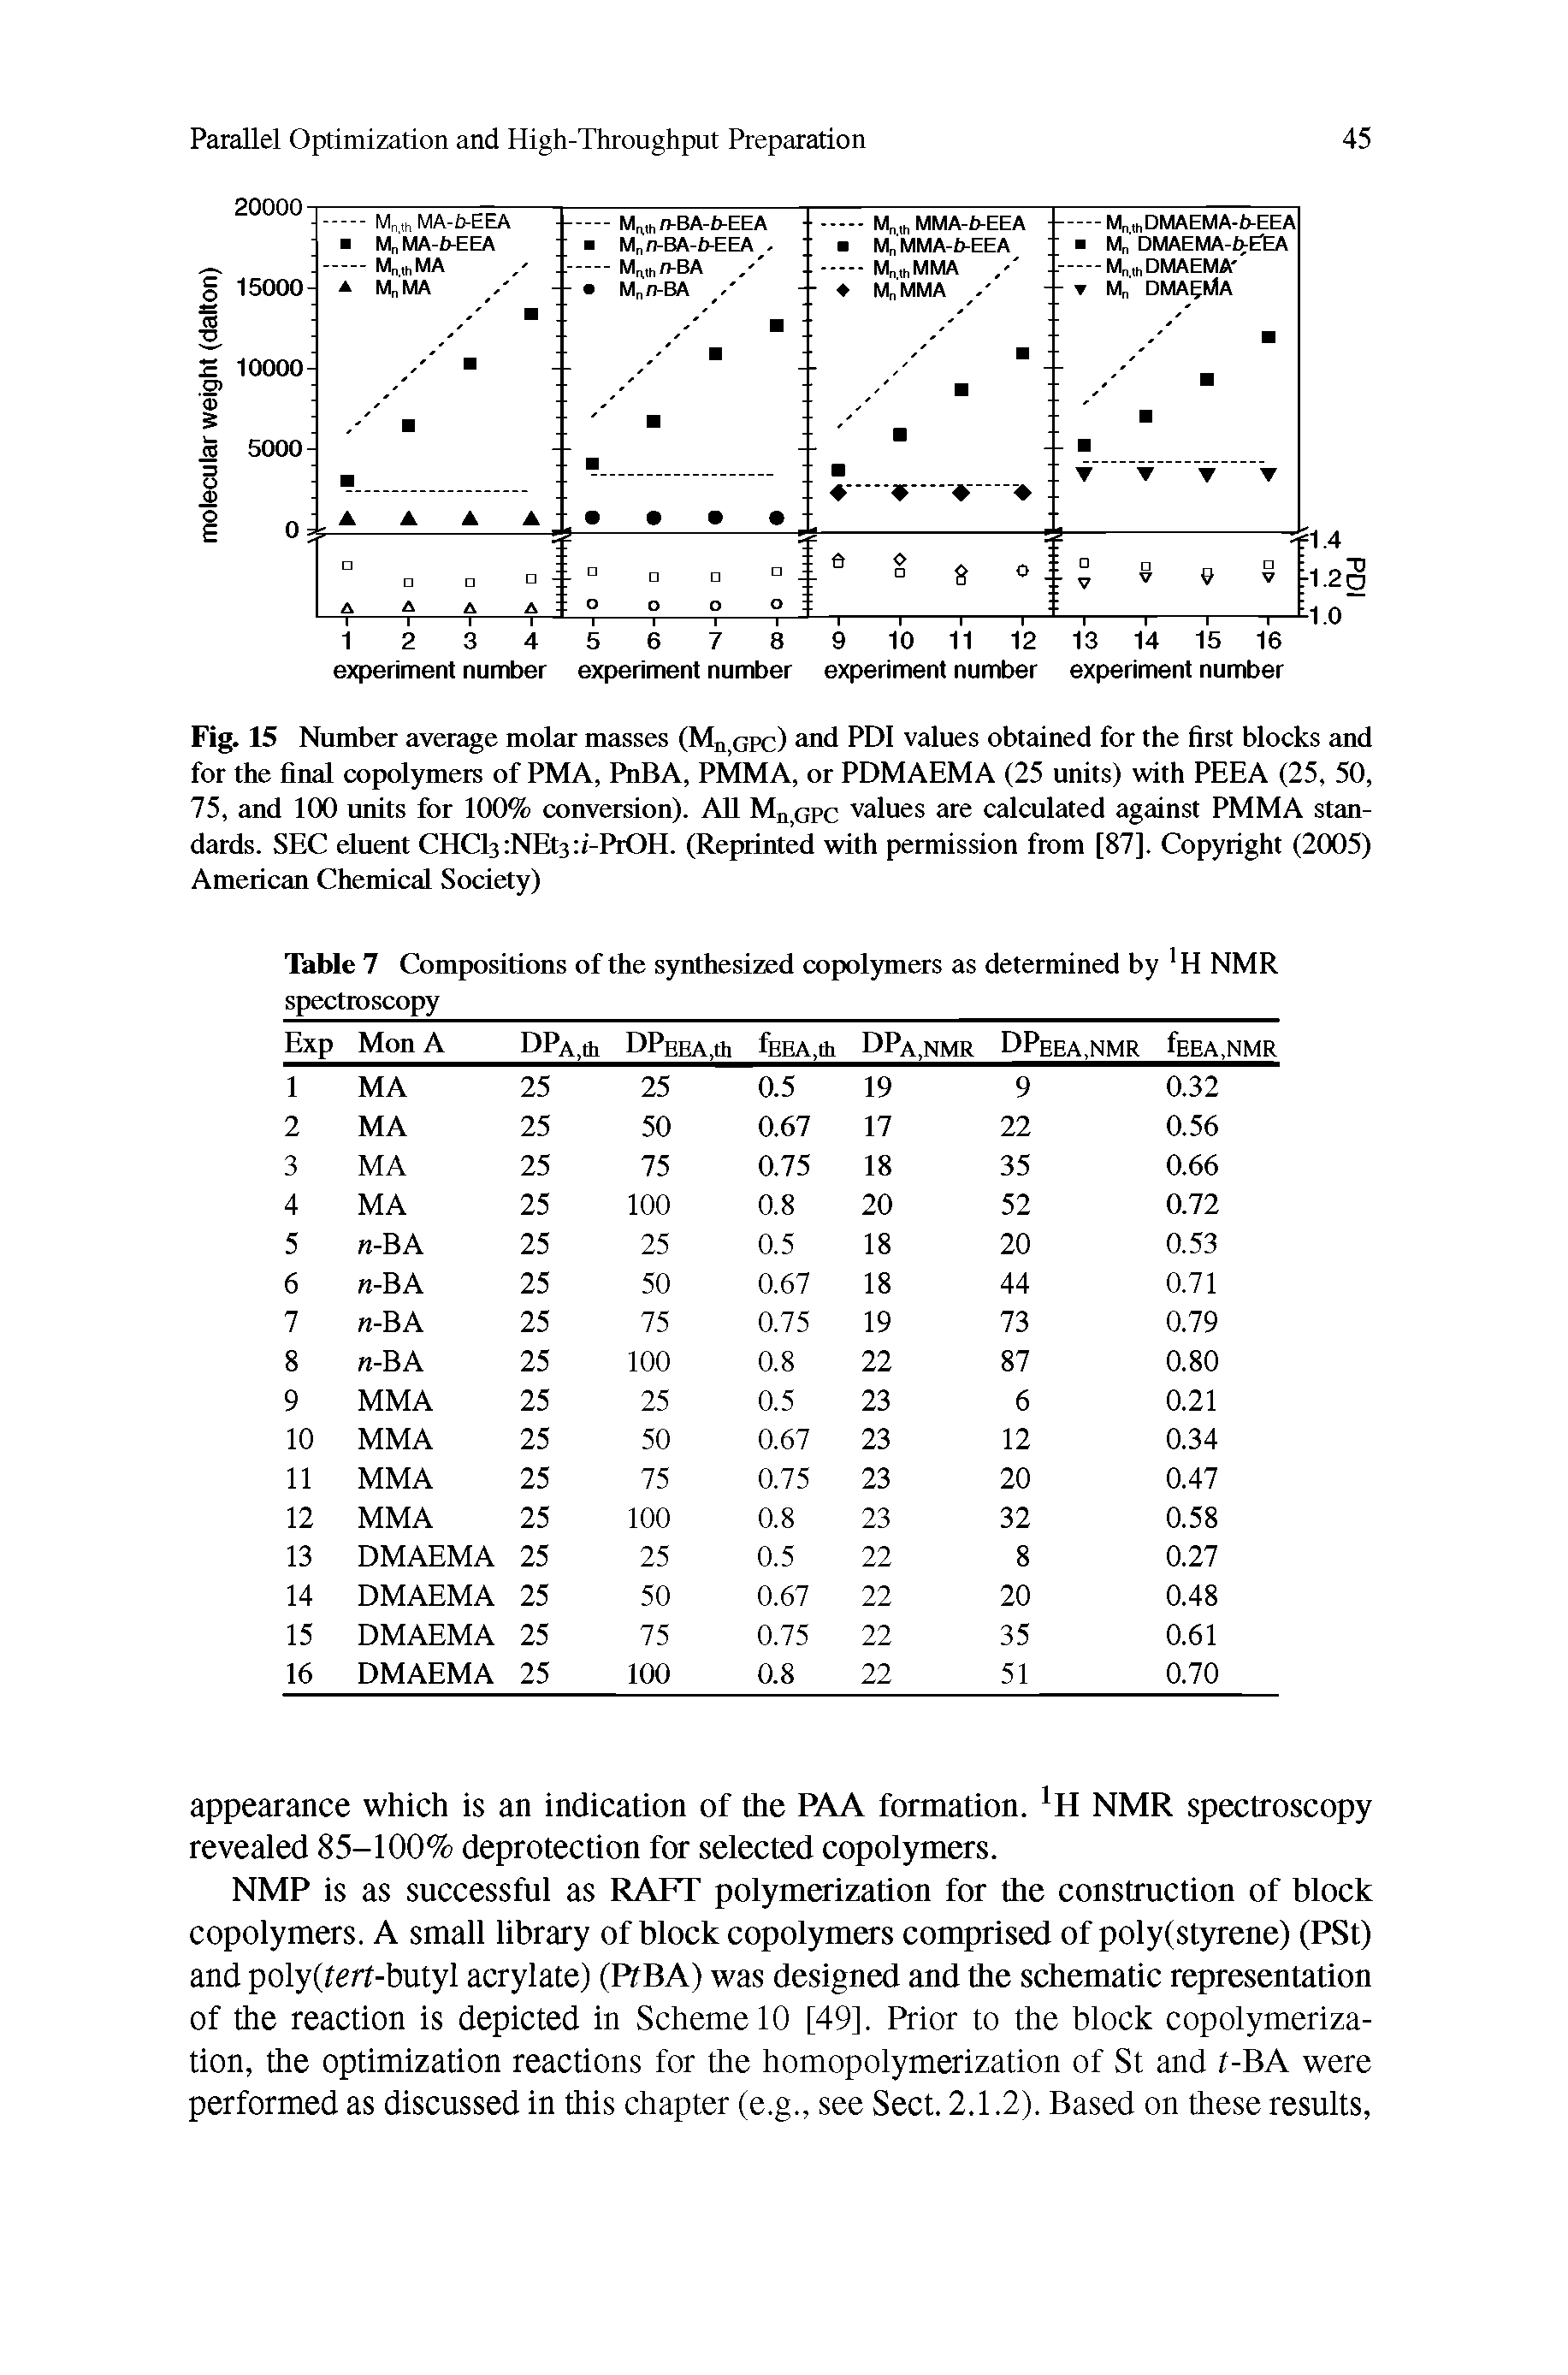 Table 7 Compositions of the synthesized copolymers as determined by H NMR spectroscopy...